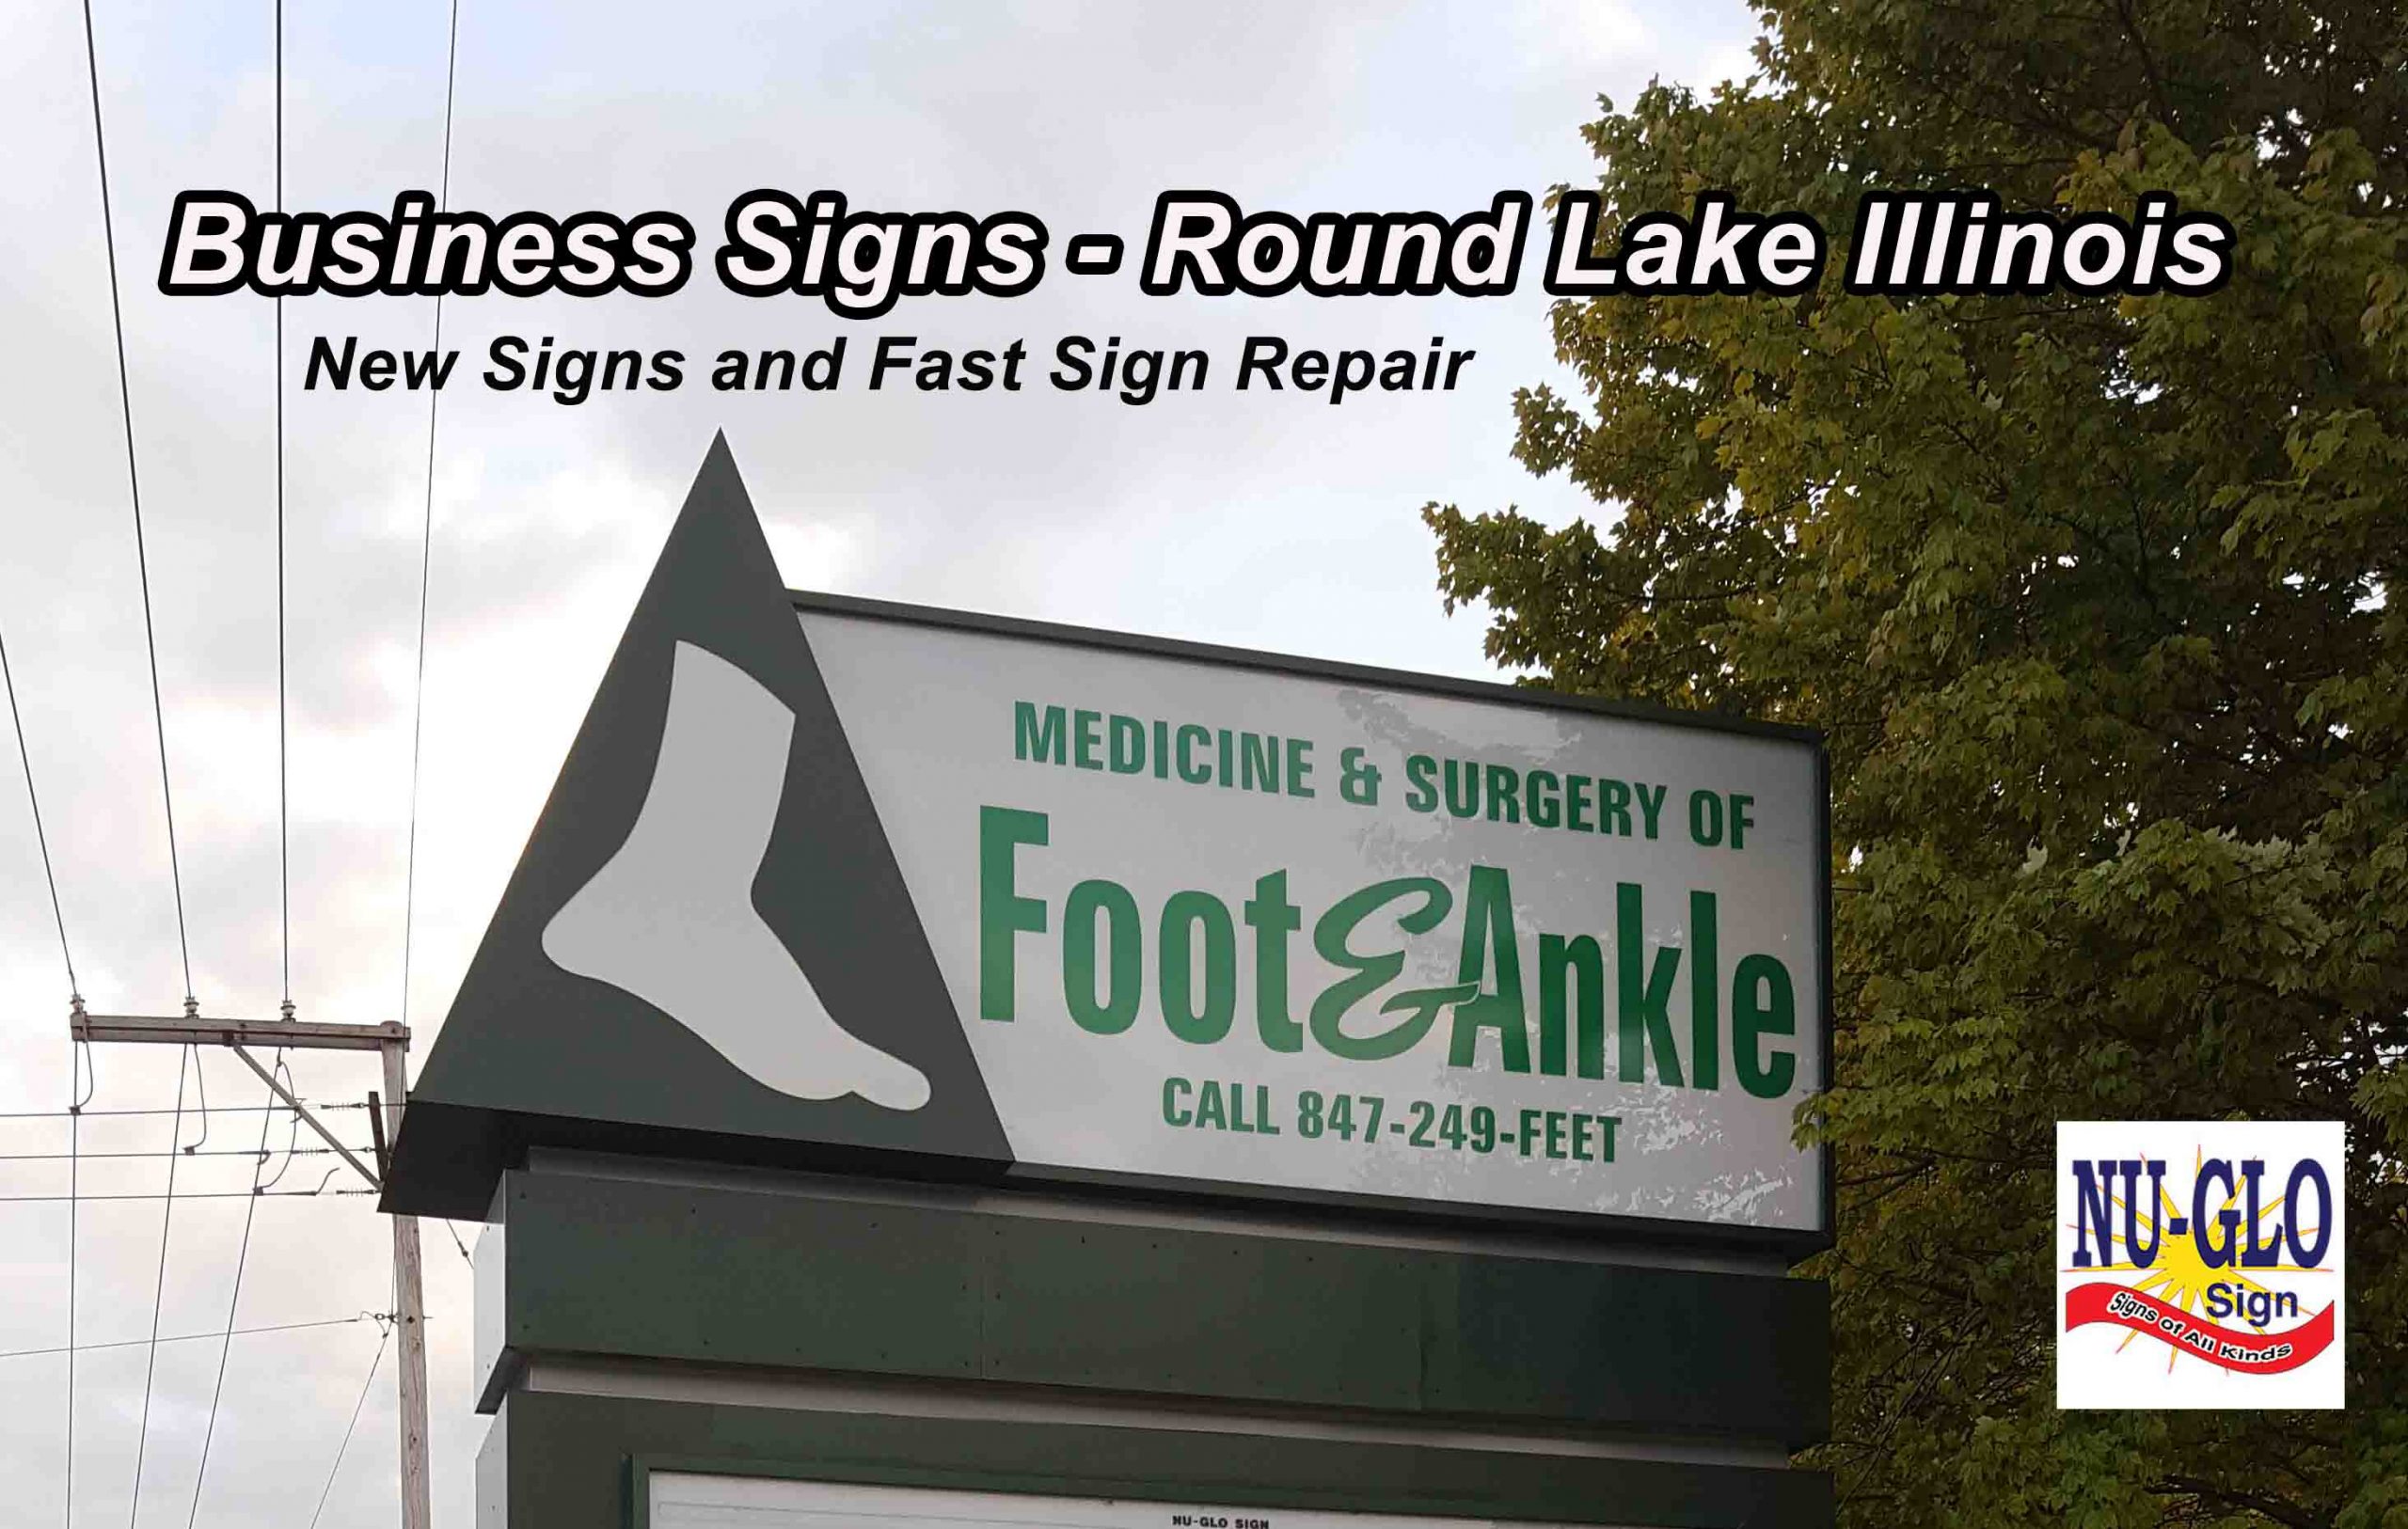 Business Signs - Round Lake Illinois